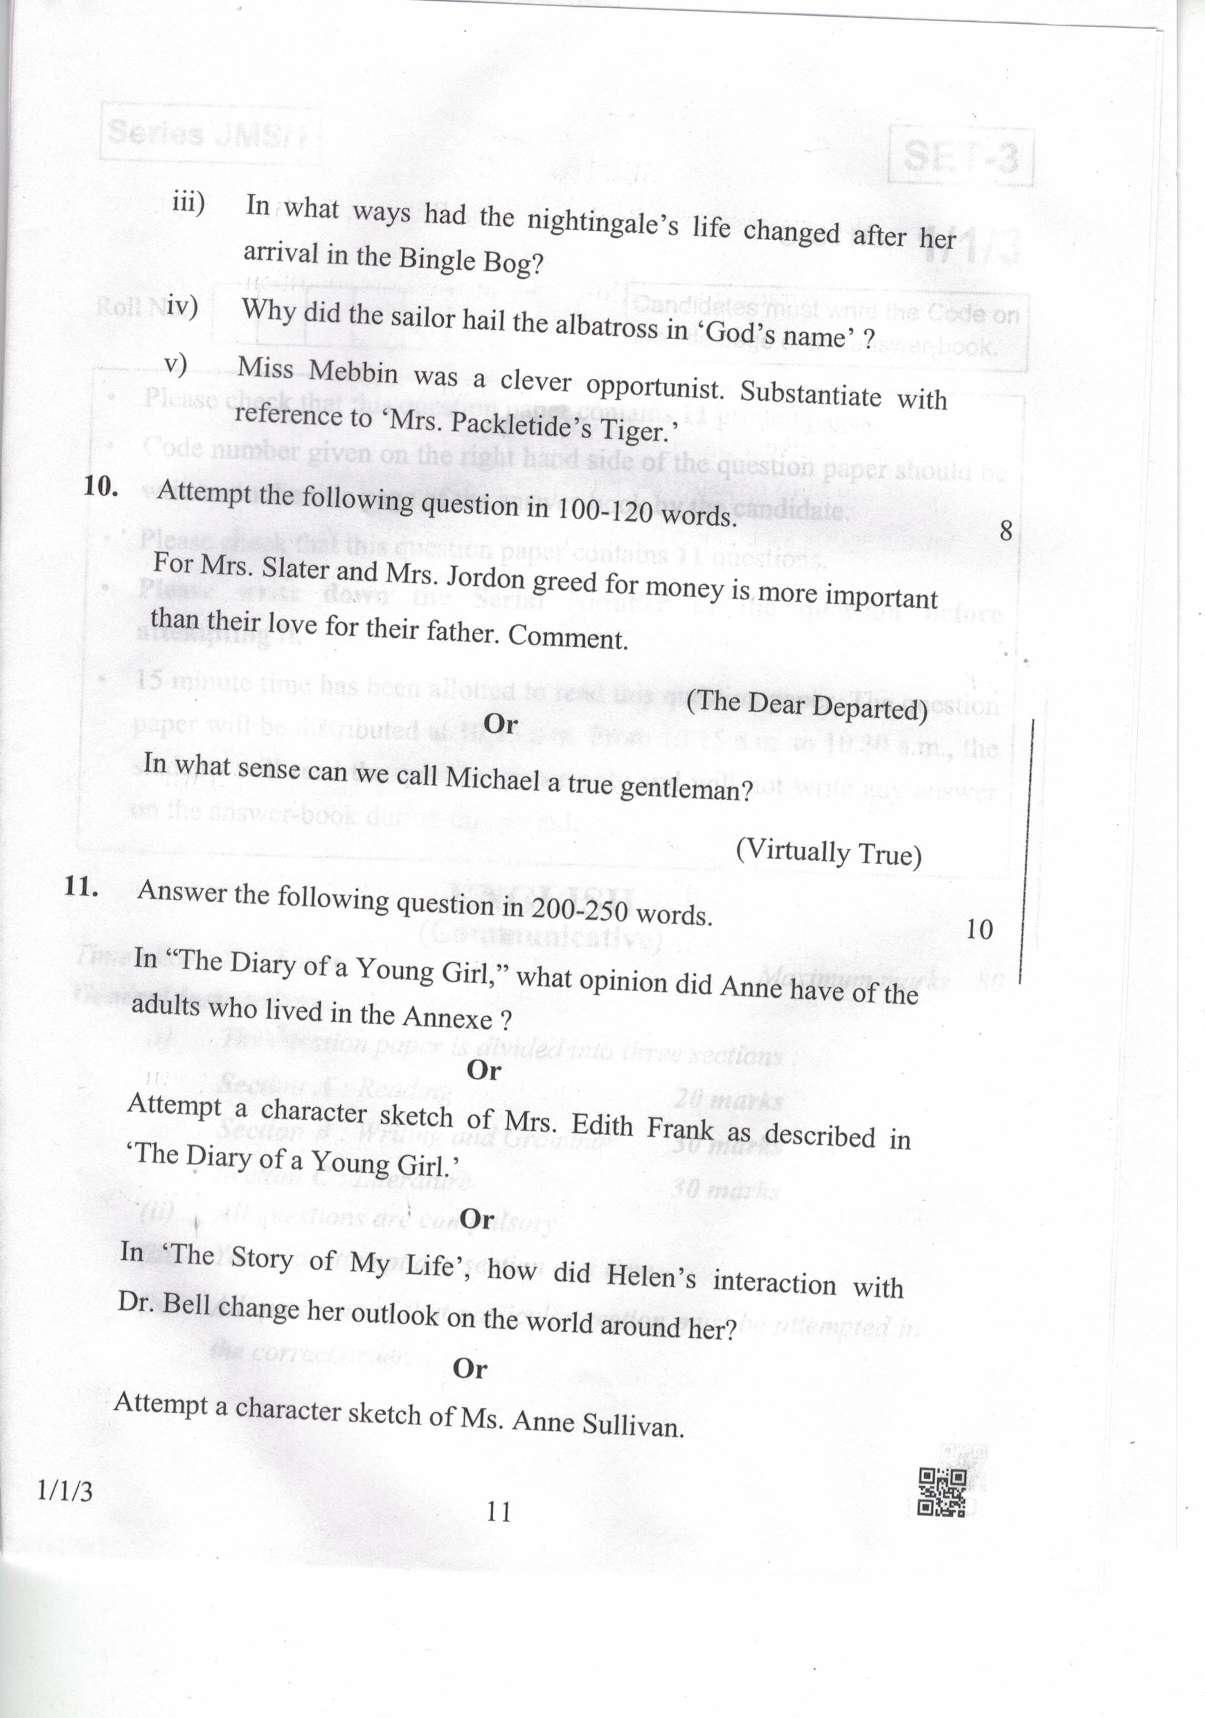 CBSE Class 10 1-1-3 Eng. Comm. 2019 Question Paper - Page 11